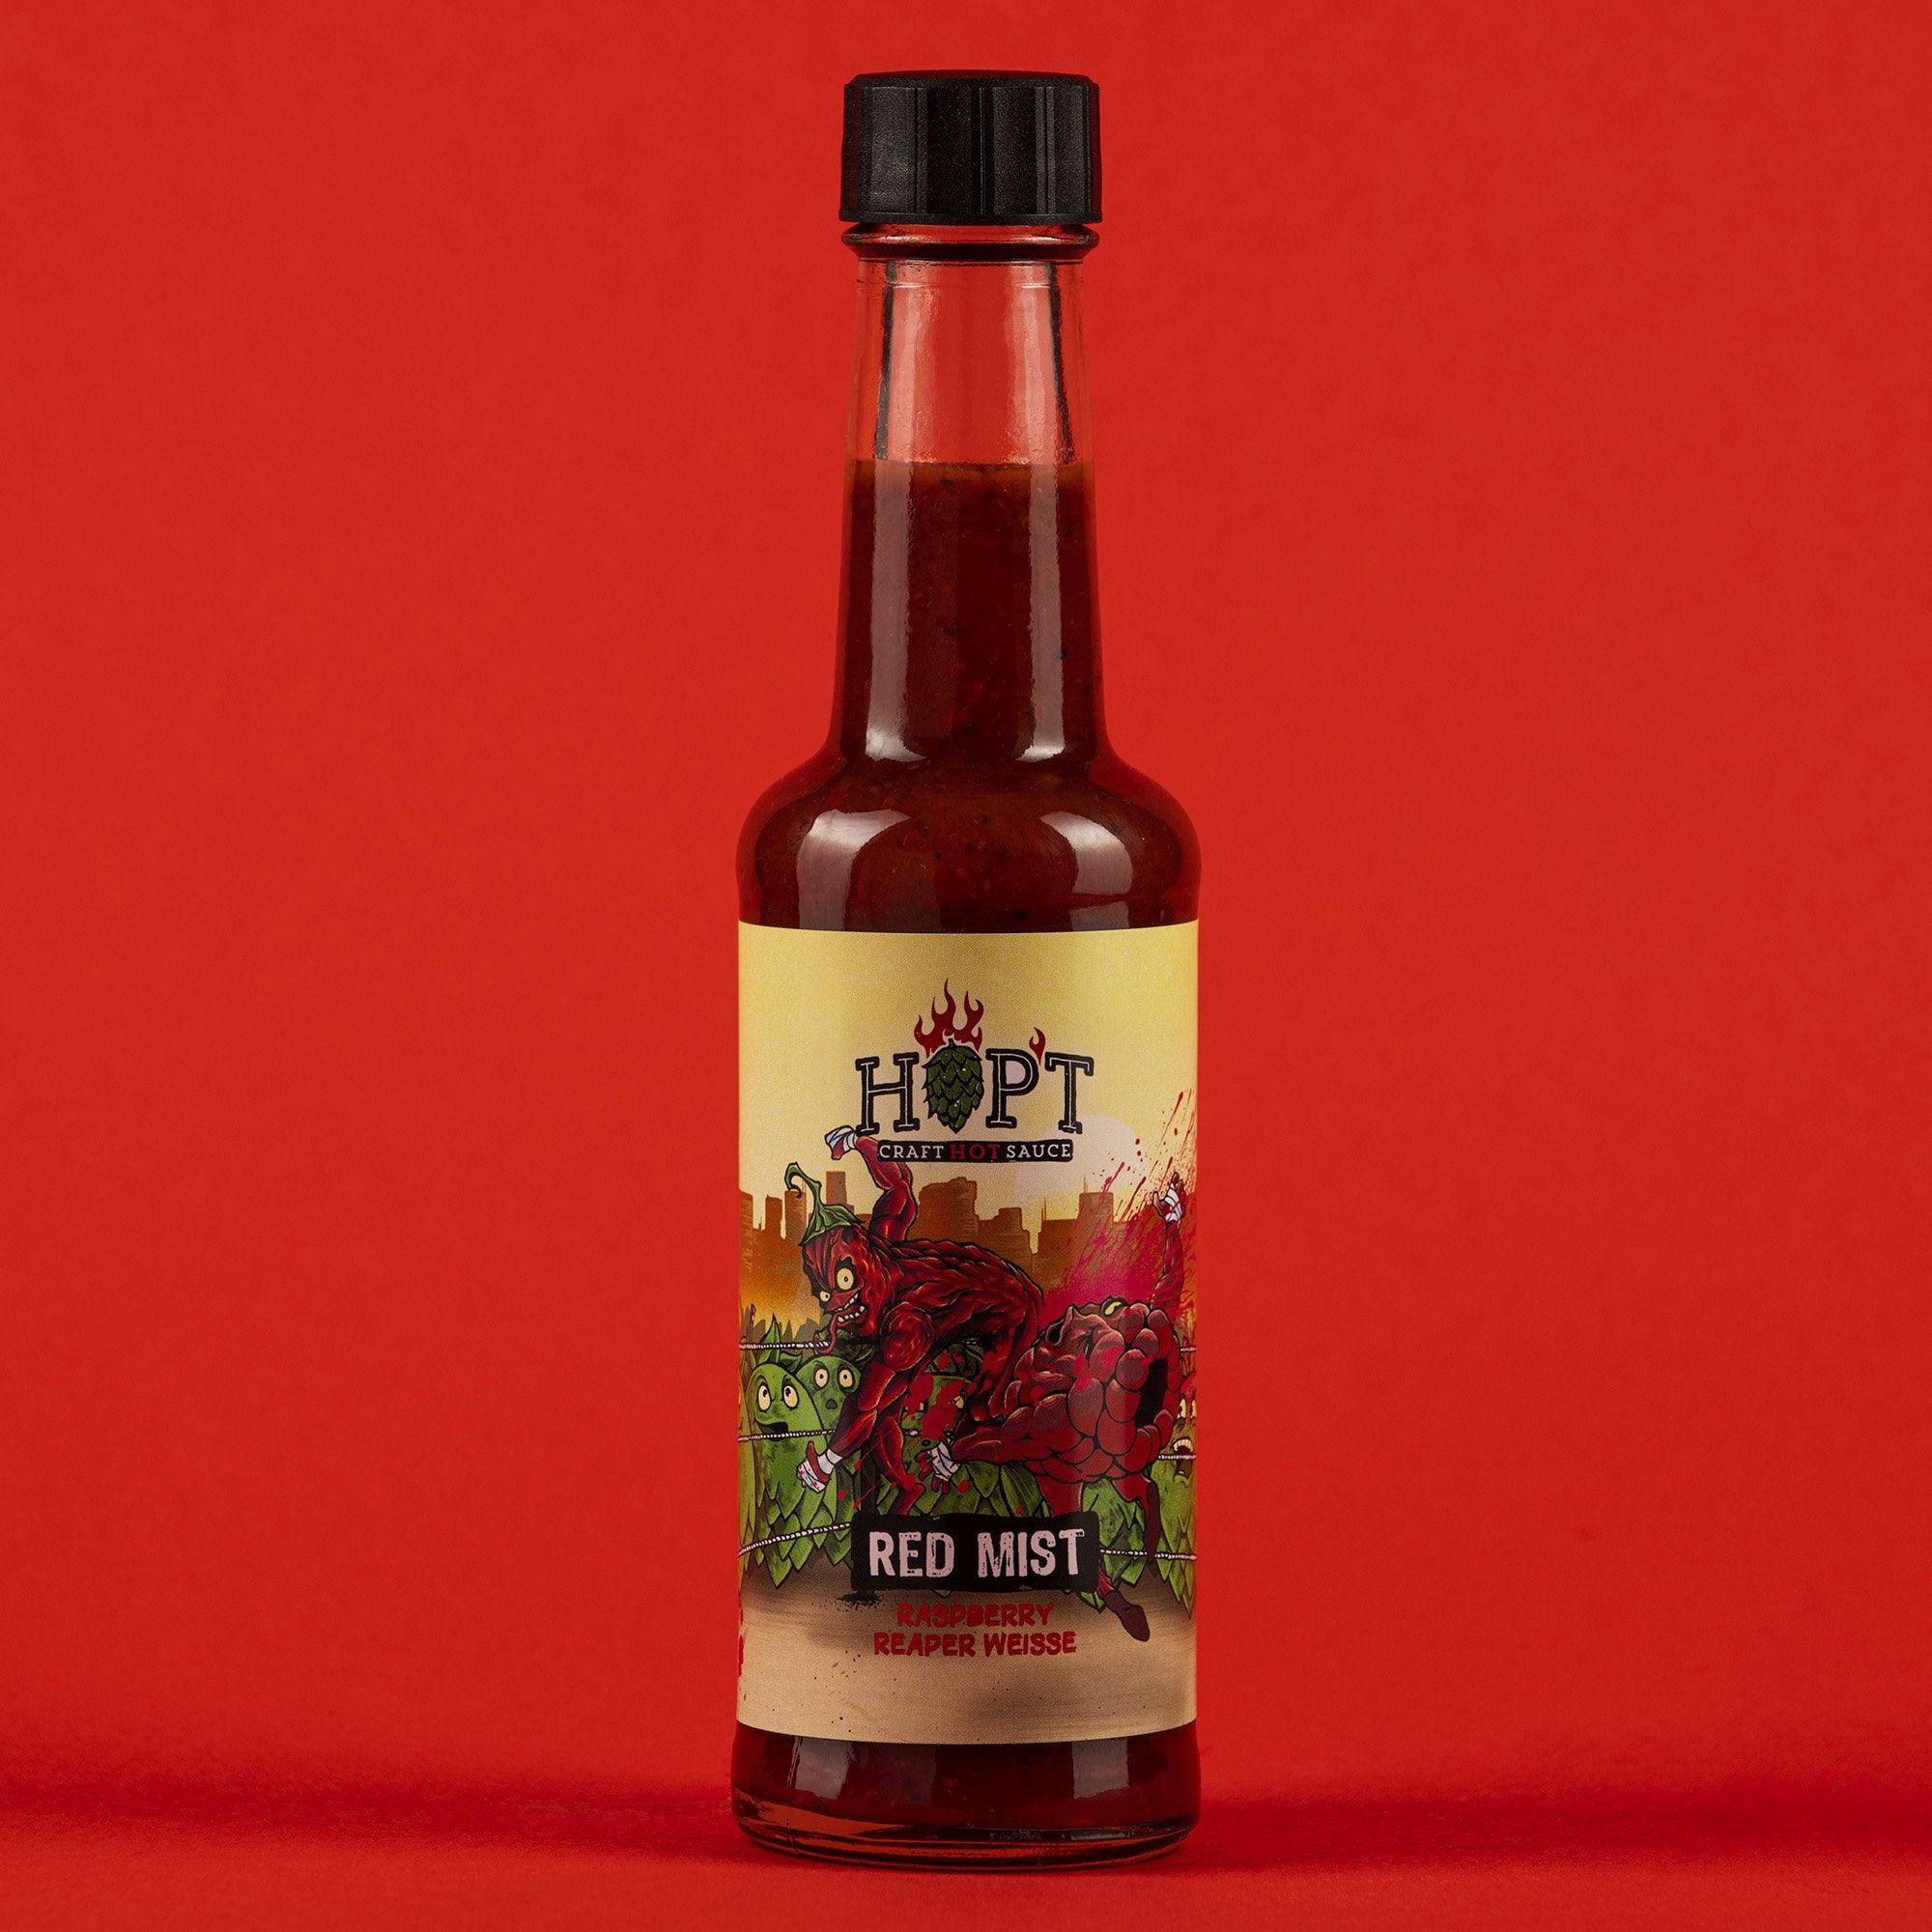 Red Mist Raspberry Reaper Weisse | 150ml | Hop't Sauce - One Stop Chilli Shop